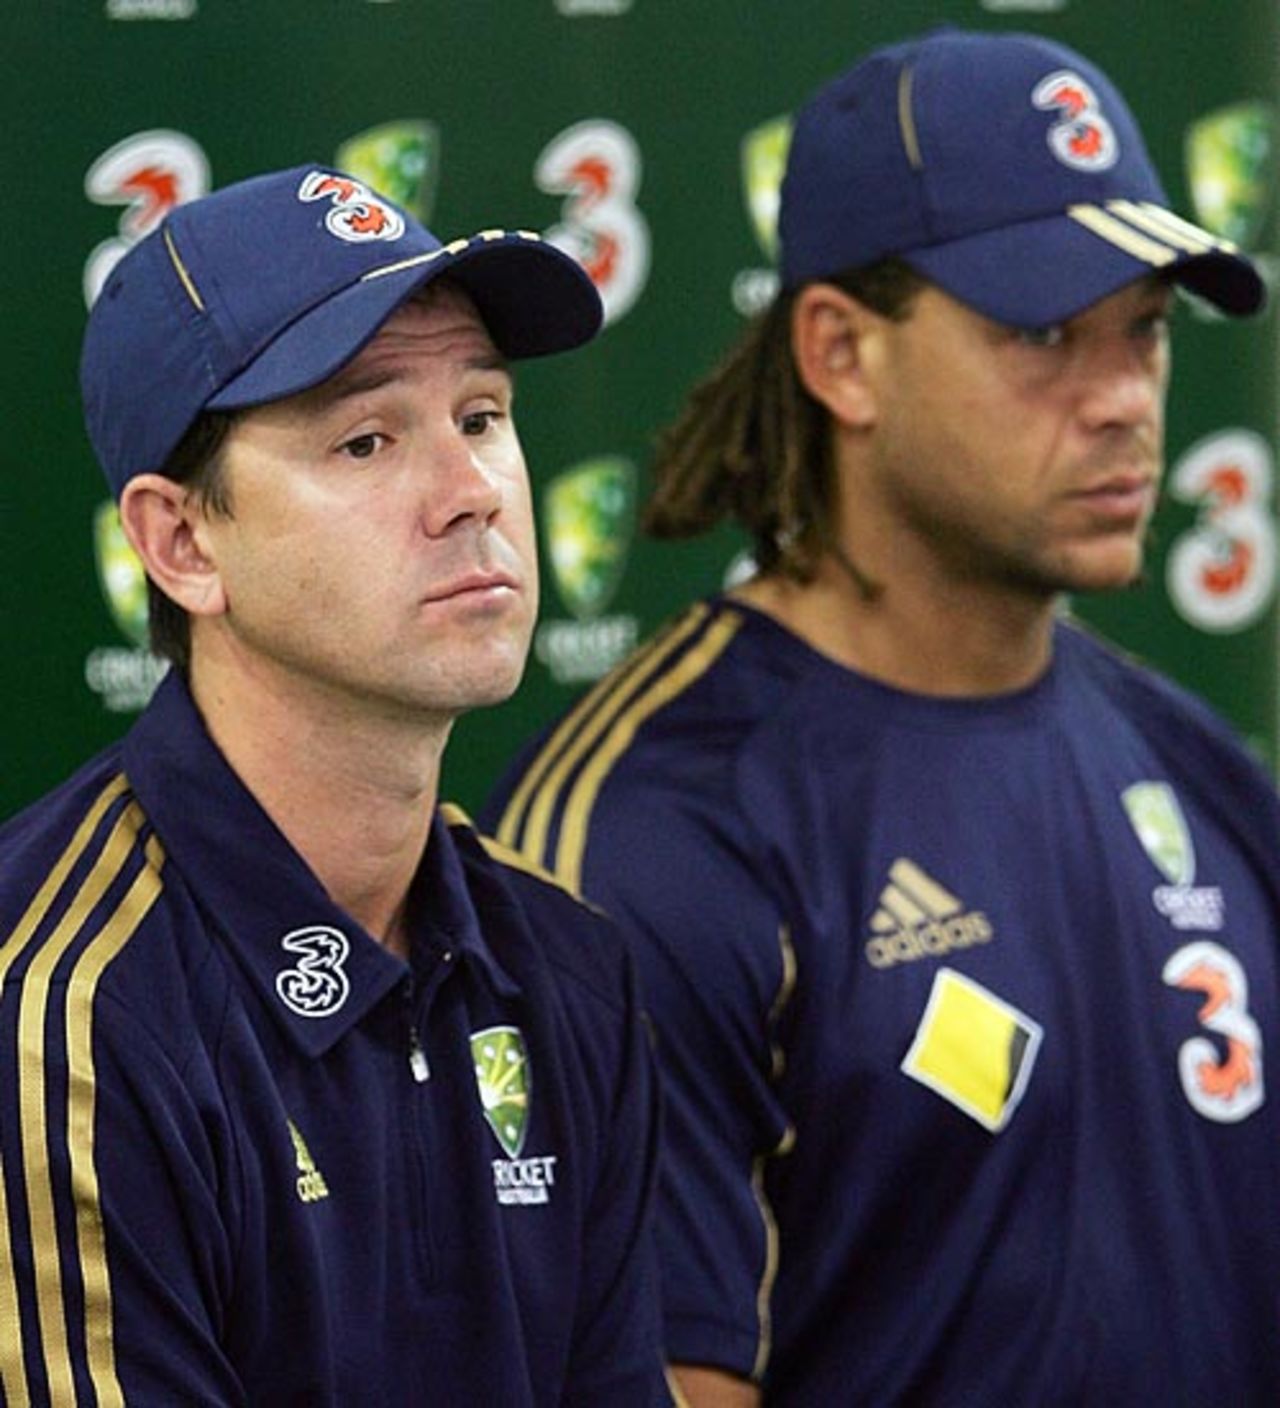 Ricky Ponting and Andrew Symonds take questions during a press conference, Adelaide, November 26, 2008